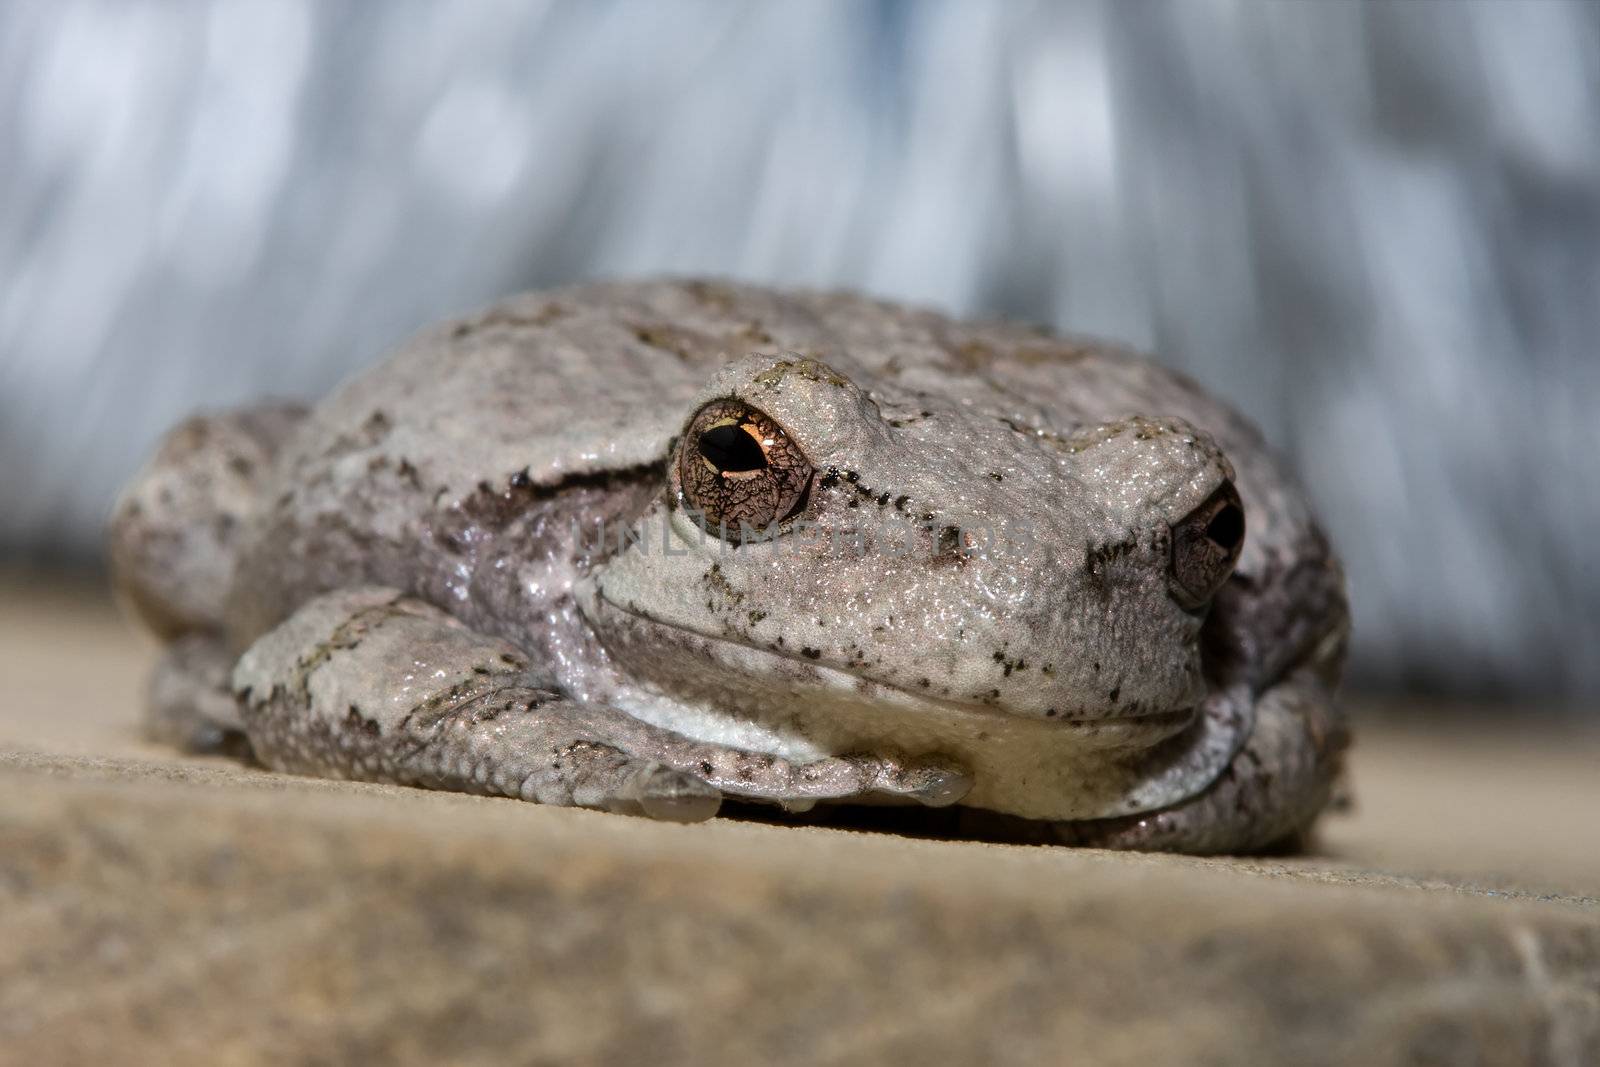 Cope's Gray Tree Frog. by Coffee999